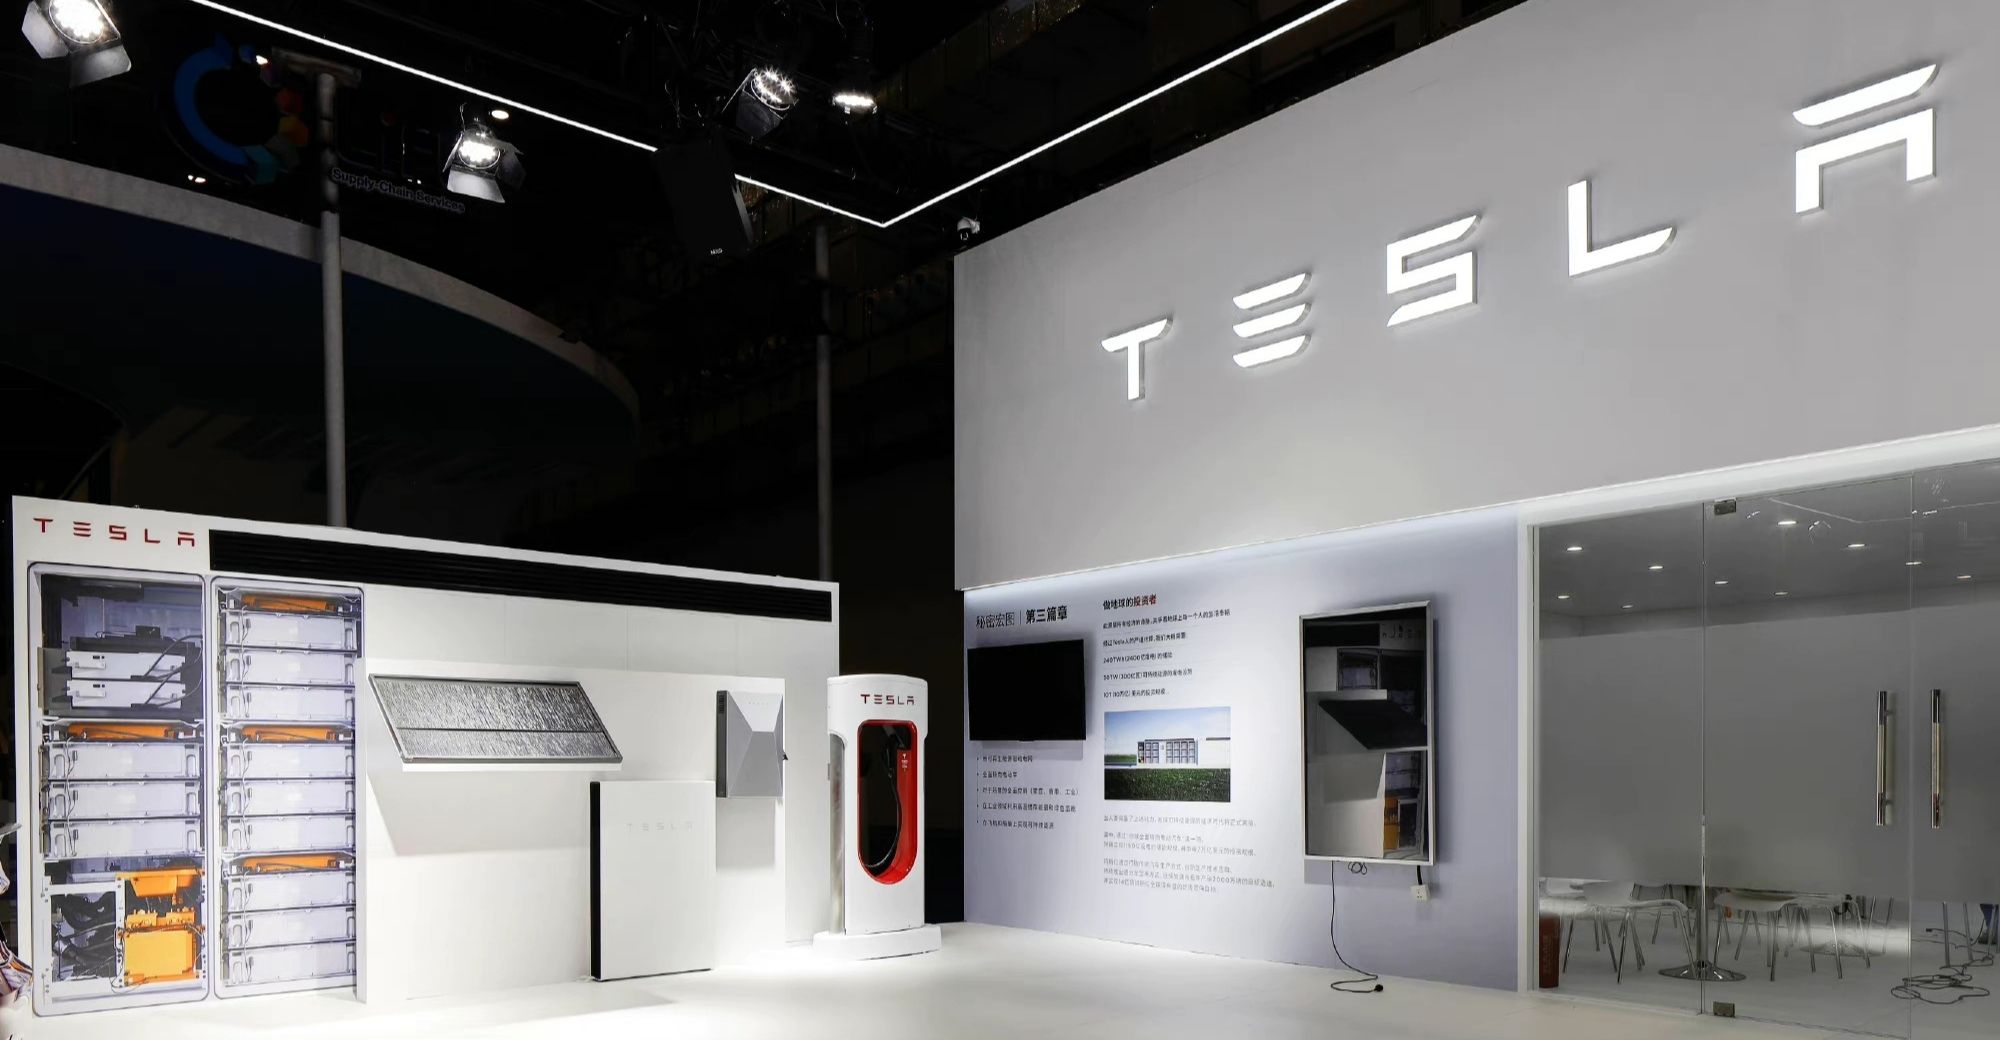 Tesla’s New Megapack Battery Factory in Shanghai Starts Recruiting